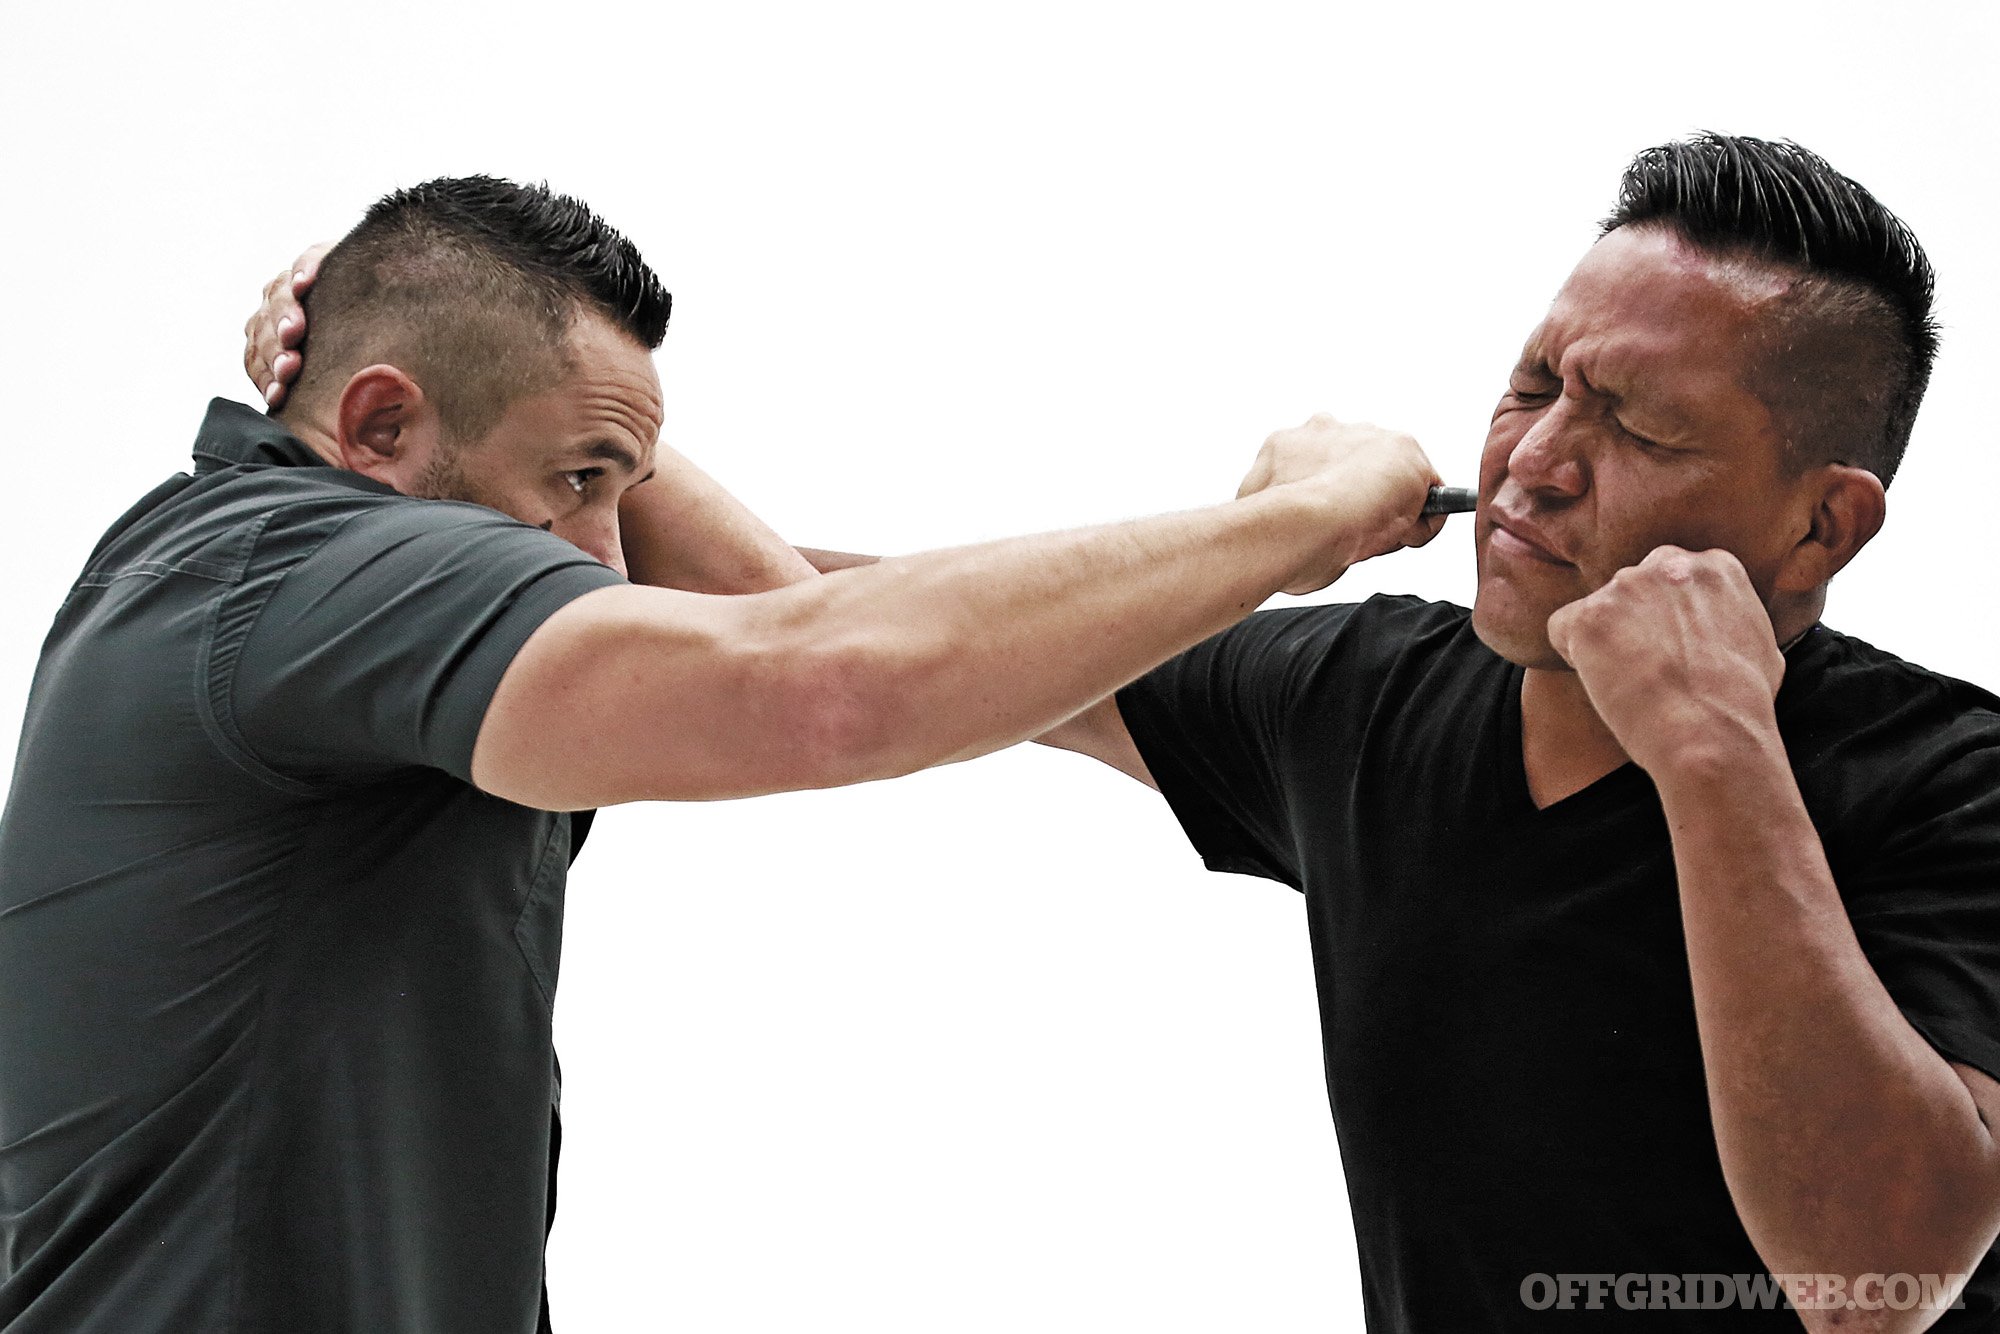 improvised weapons for self defense